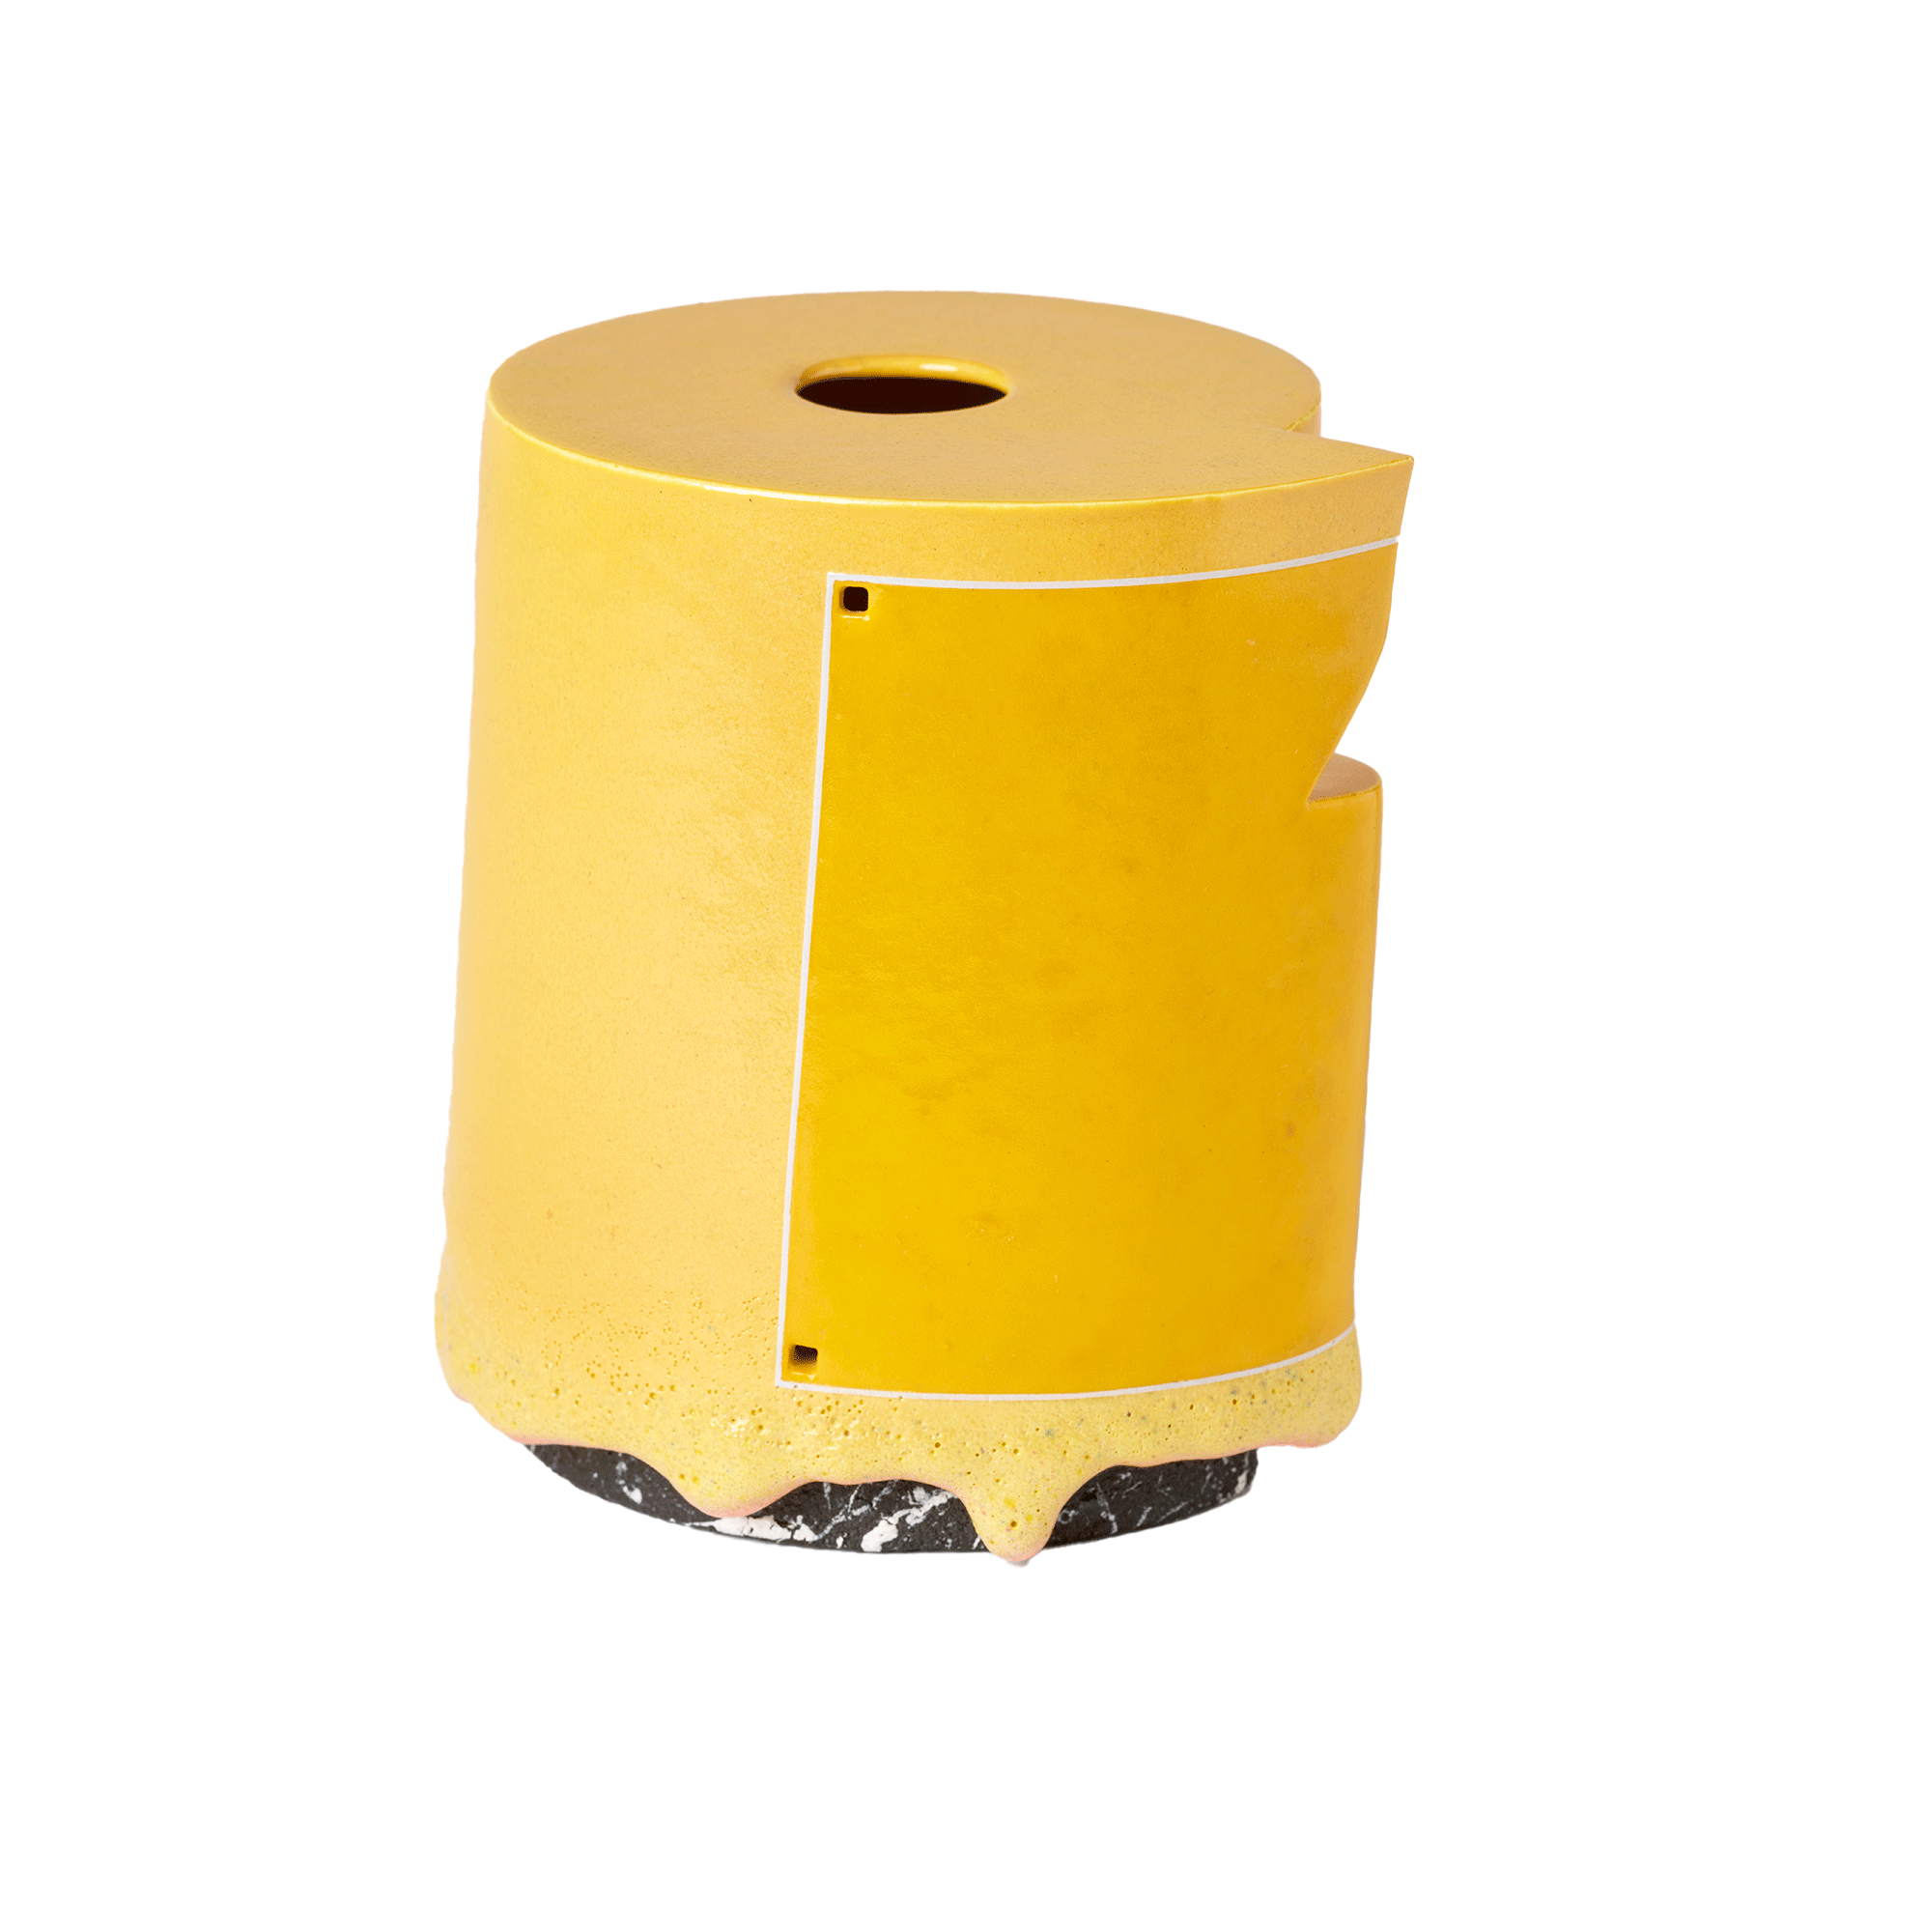 /Yellow%20cylindrical%20form%20with%20a%20hole%20in%20the%20top.%20Darker%20yellow%20square%20framed%20in%20a%20white%20line%20on%20the%20body.%20Yellow%20drips%20over%20a%20black%20base%20with%20streaks%20of%20white.%20